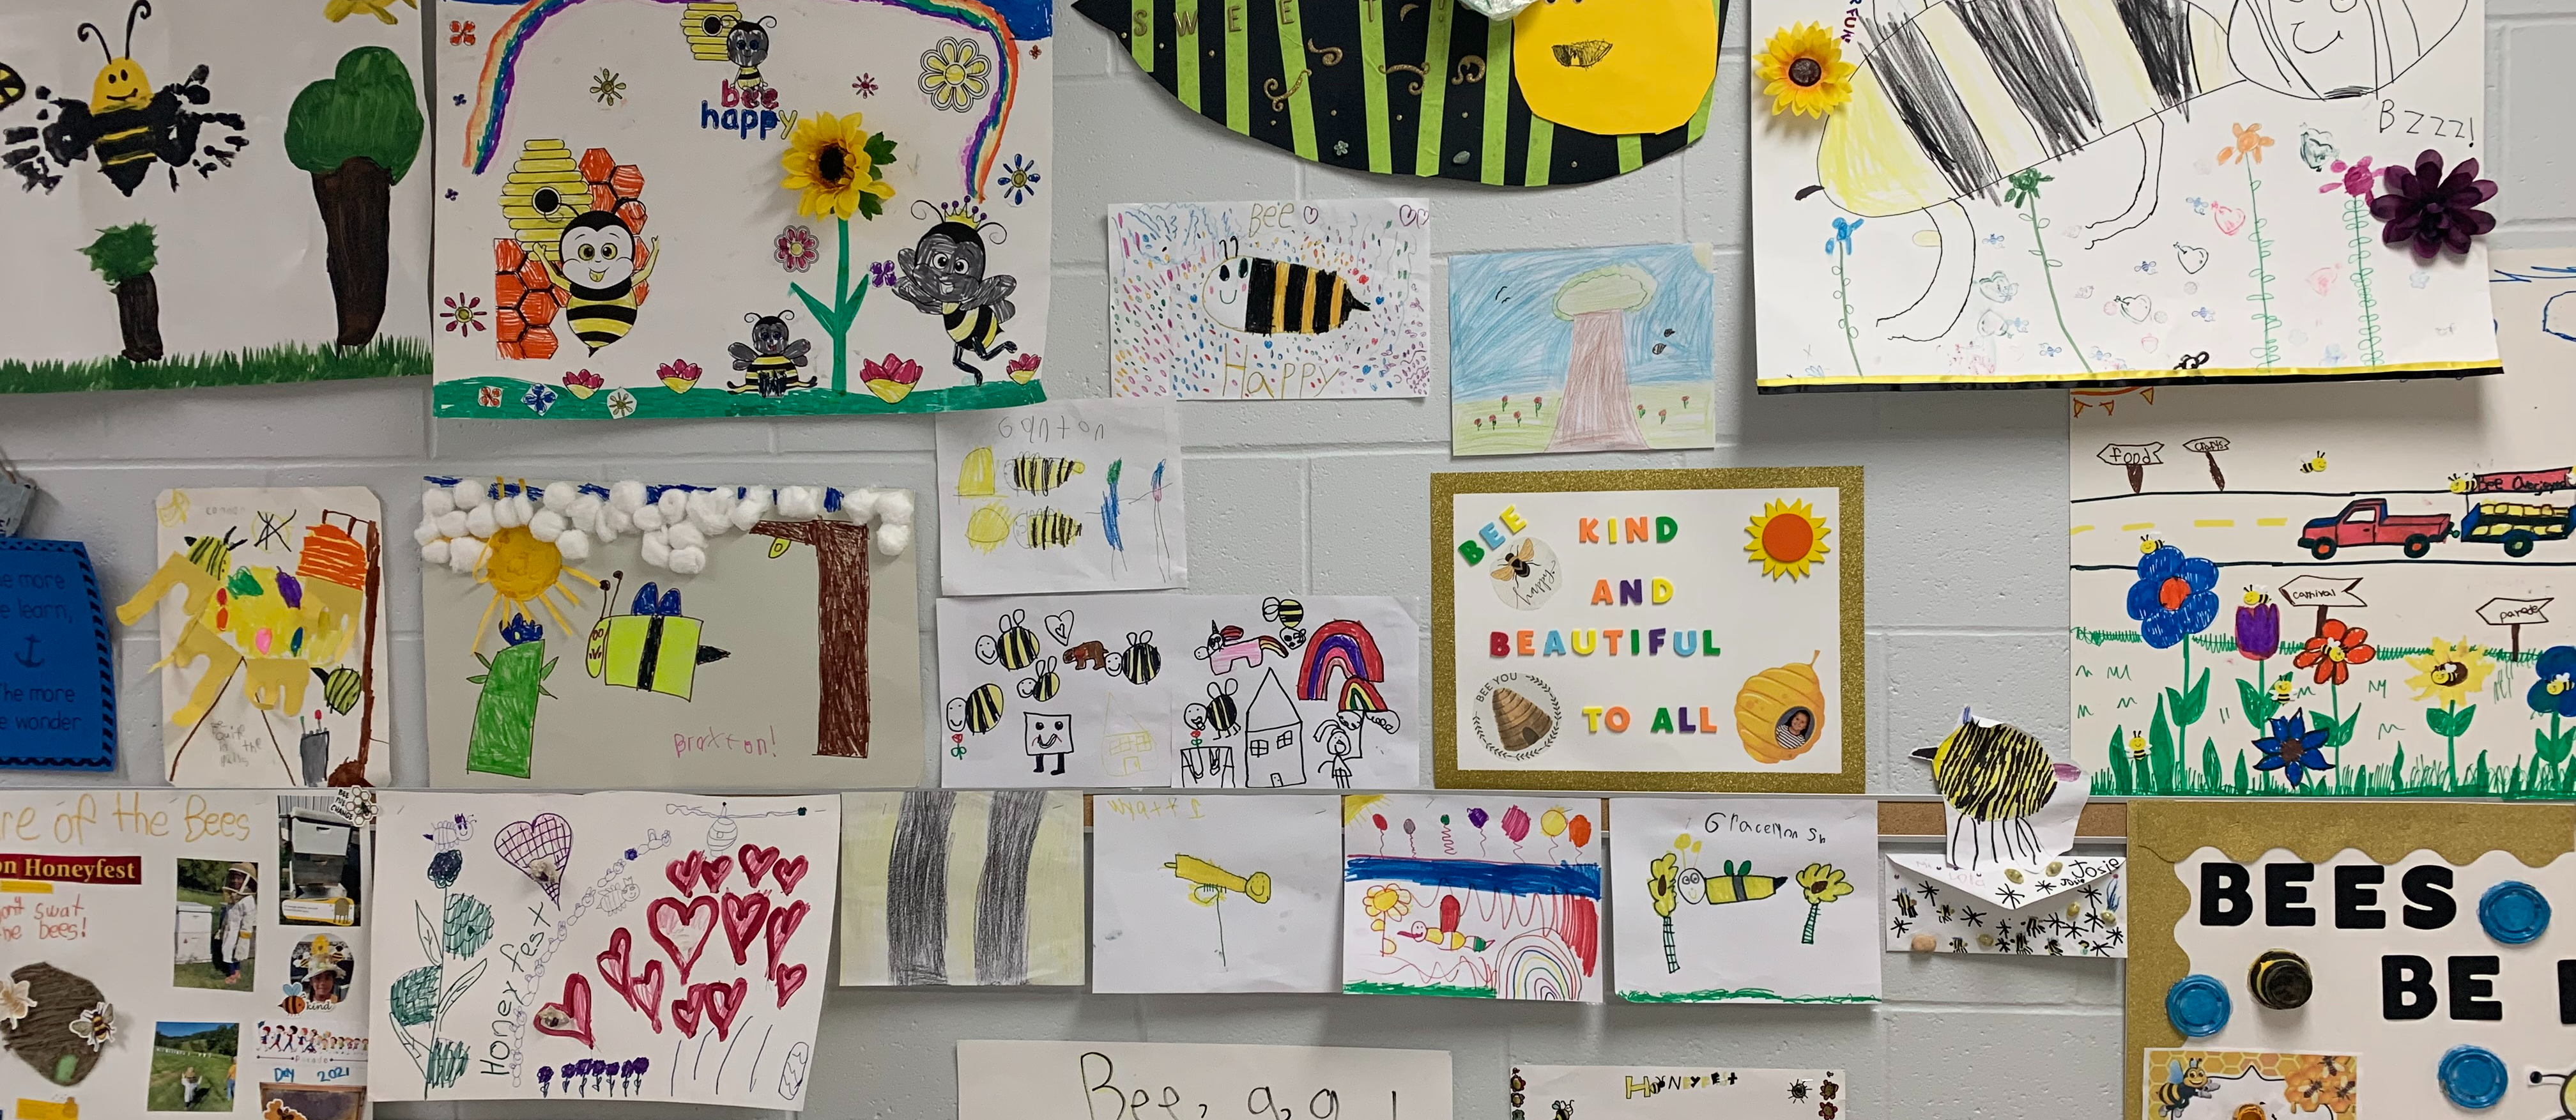 Honeyfest Poster Contest - student made posters featuring bees, trees, flowers and other honey-themed drawings on a white school wall